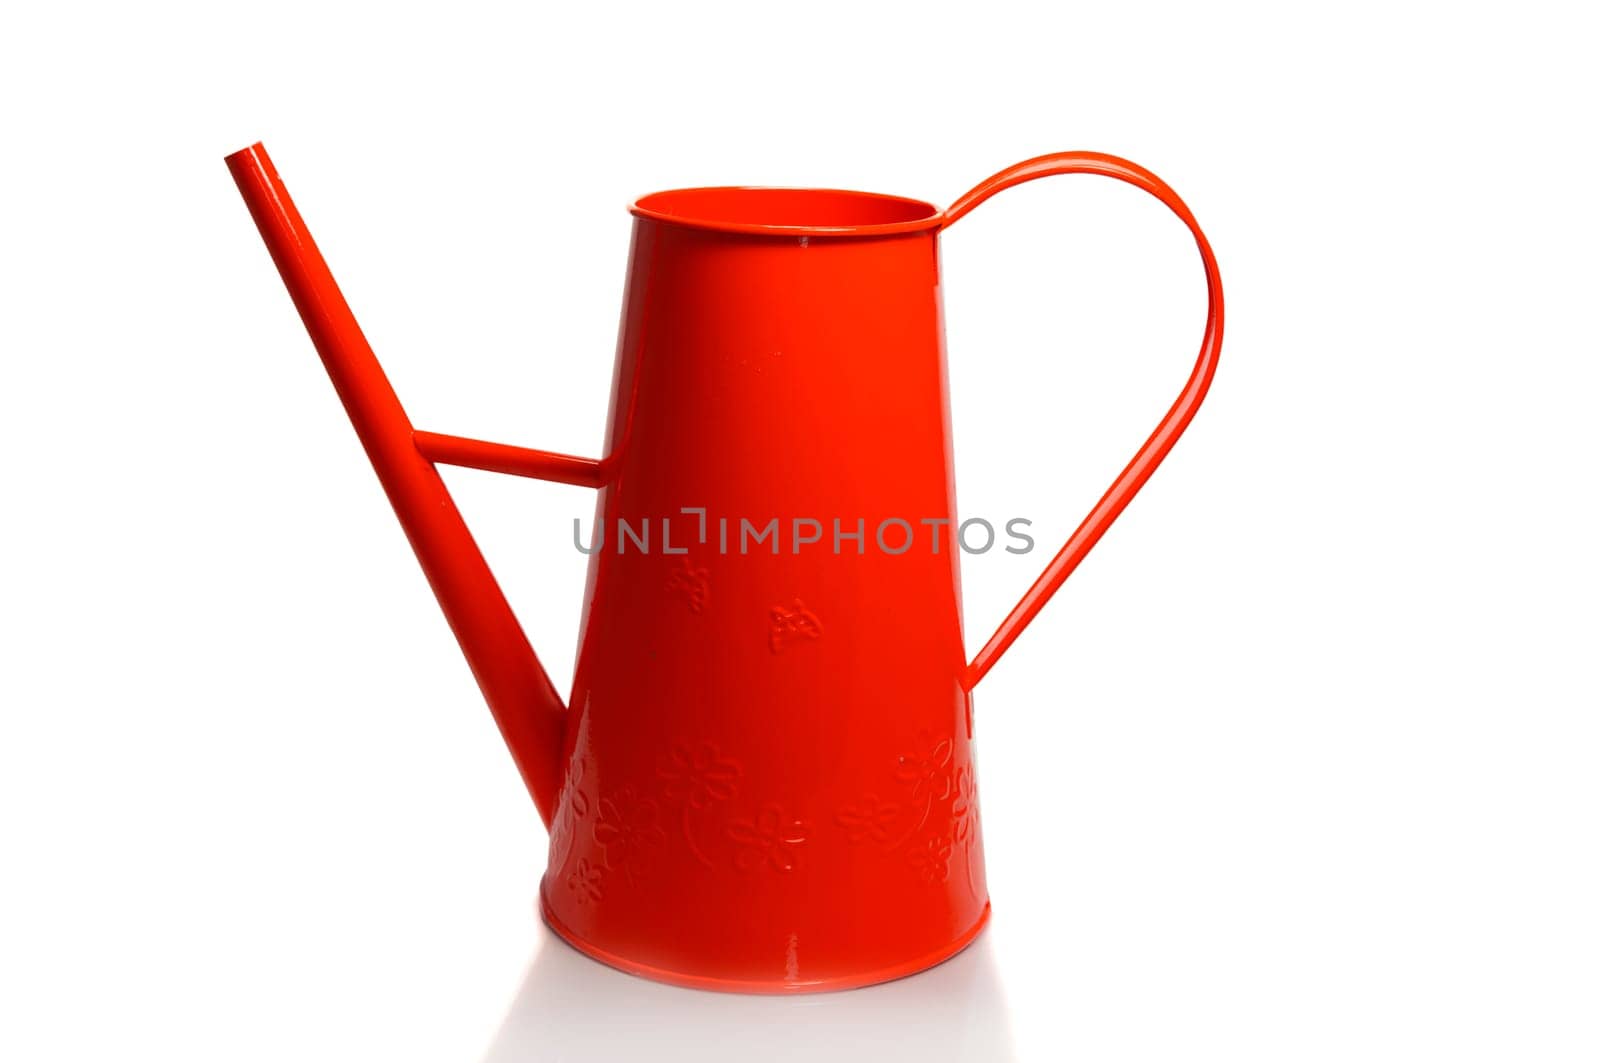 red metal watering can for watering plants in the garden or at home isolated on white background